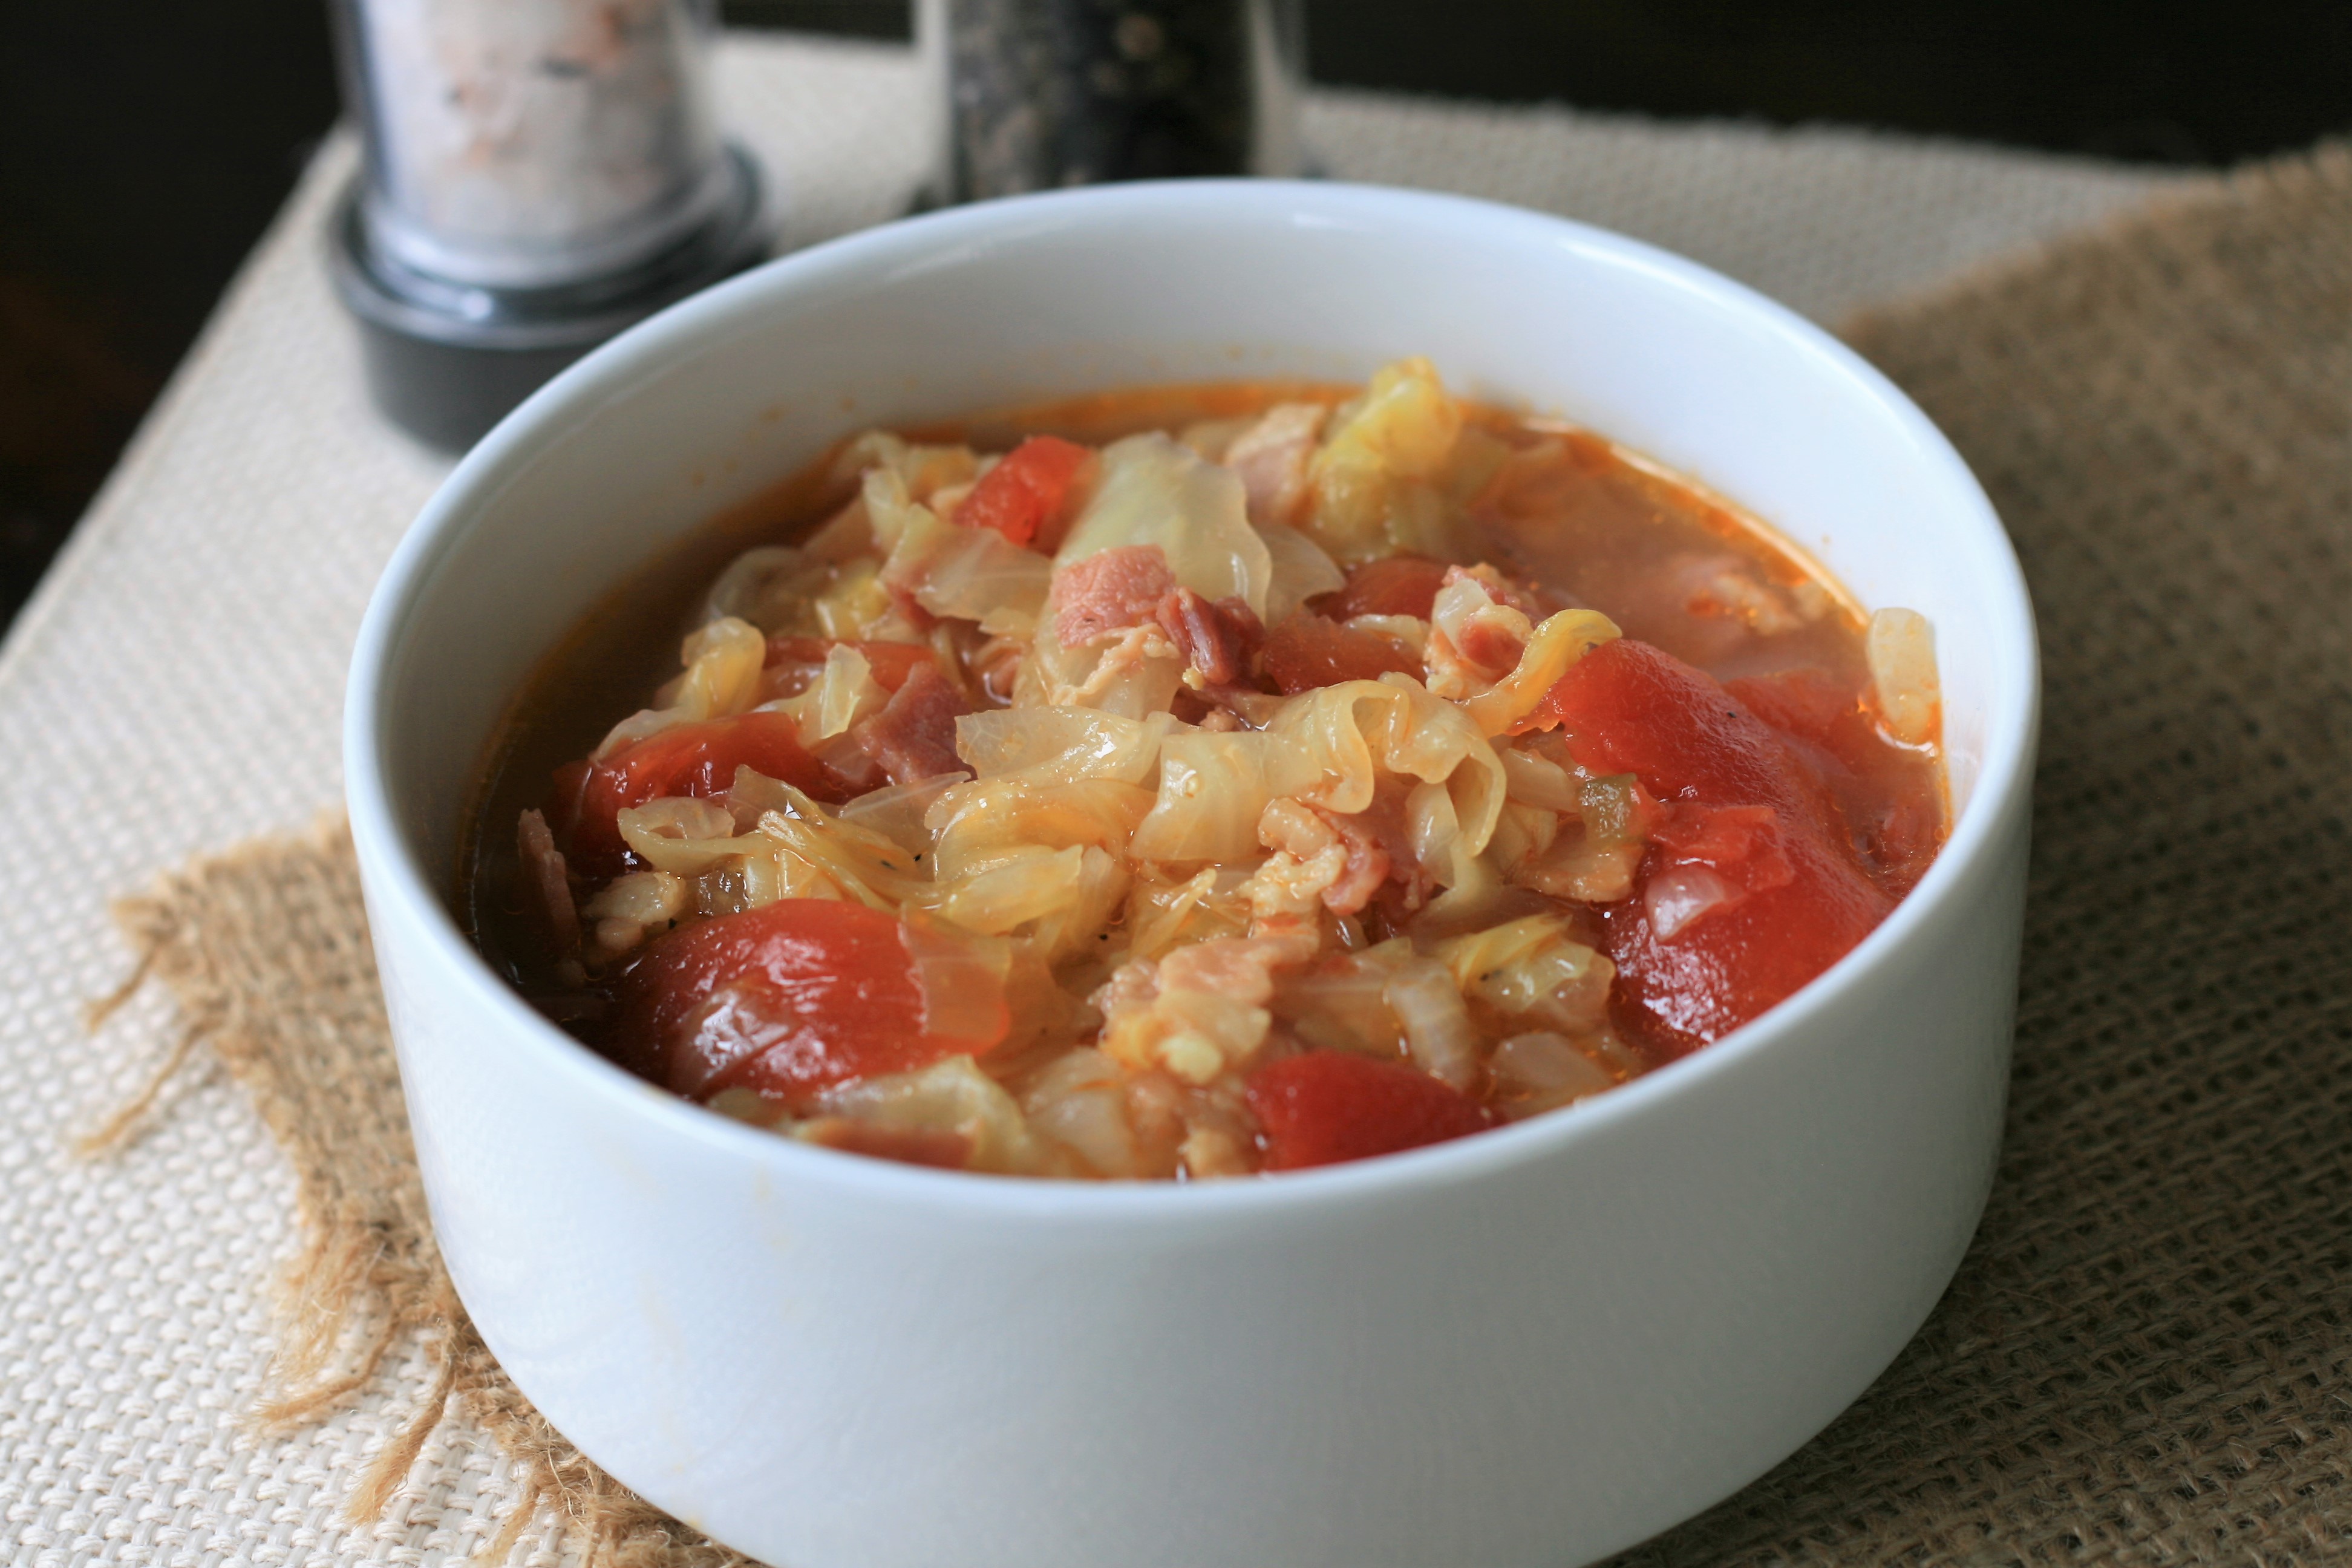 Spicy Cabbage Soup 